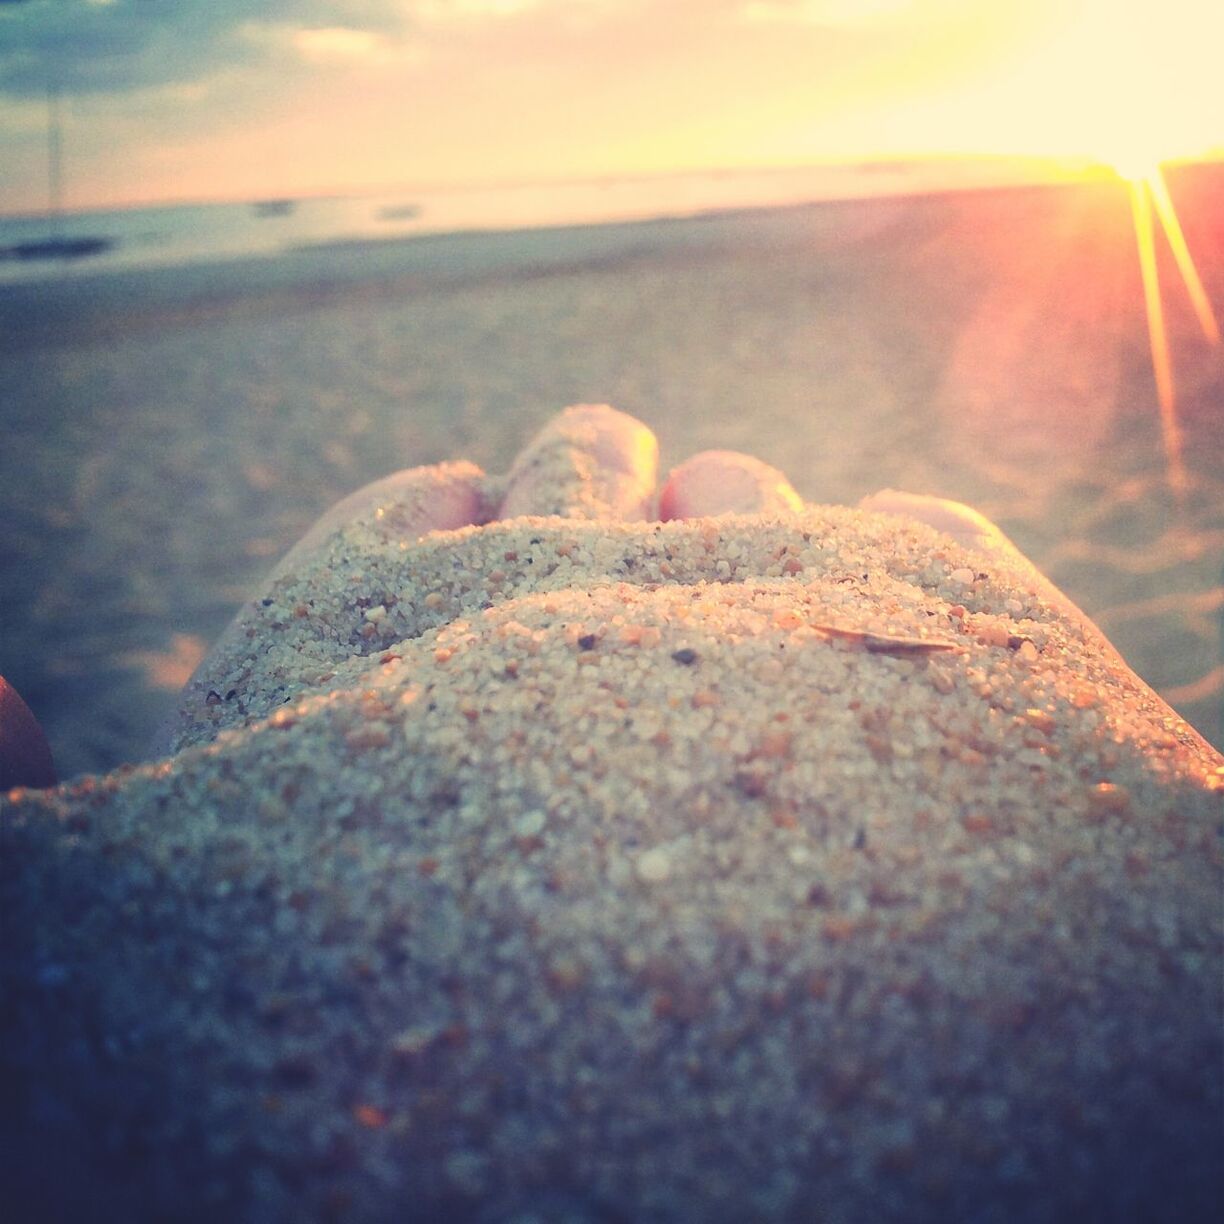 sun, beach, tranquility, sunset, sunlight, sky, tranquil scene, nature, scenics, sea, beauty in nature, sand, rock - object, water, sunbeam, surface level, lens flare, close-up, shore, selective focus